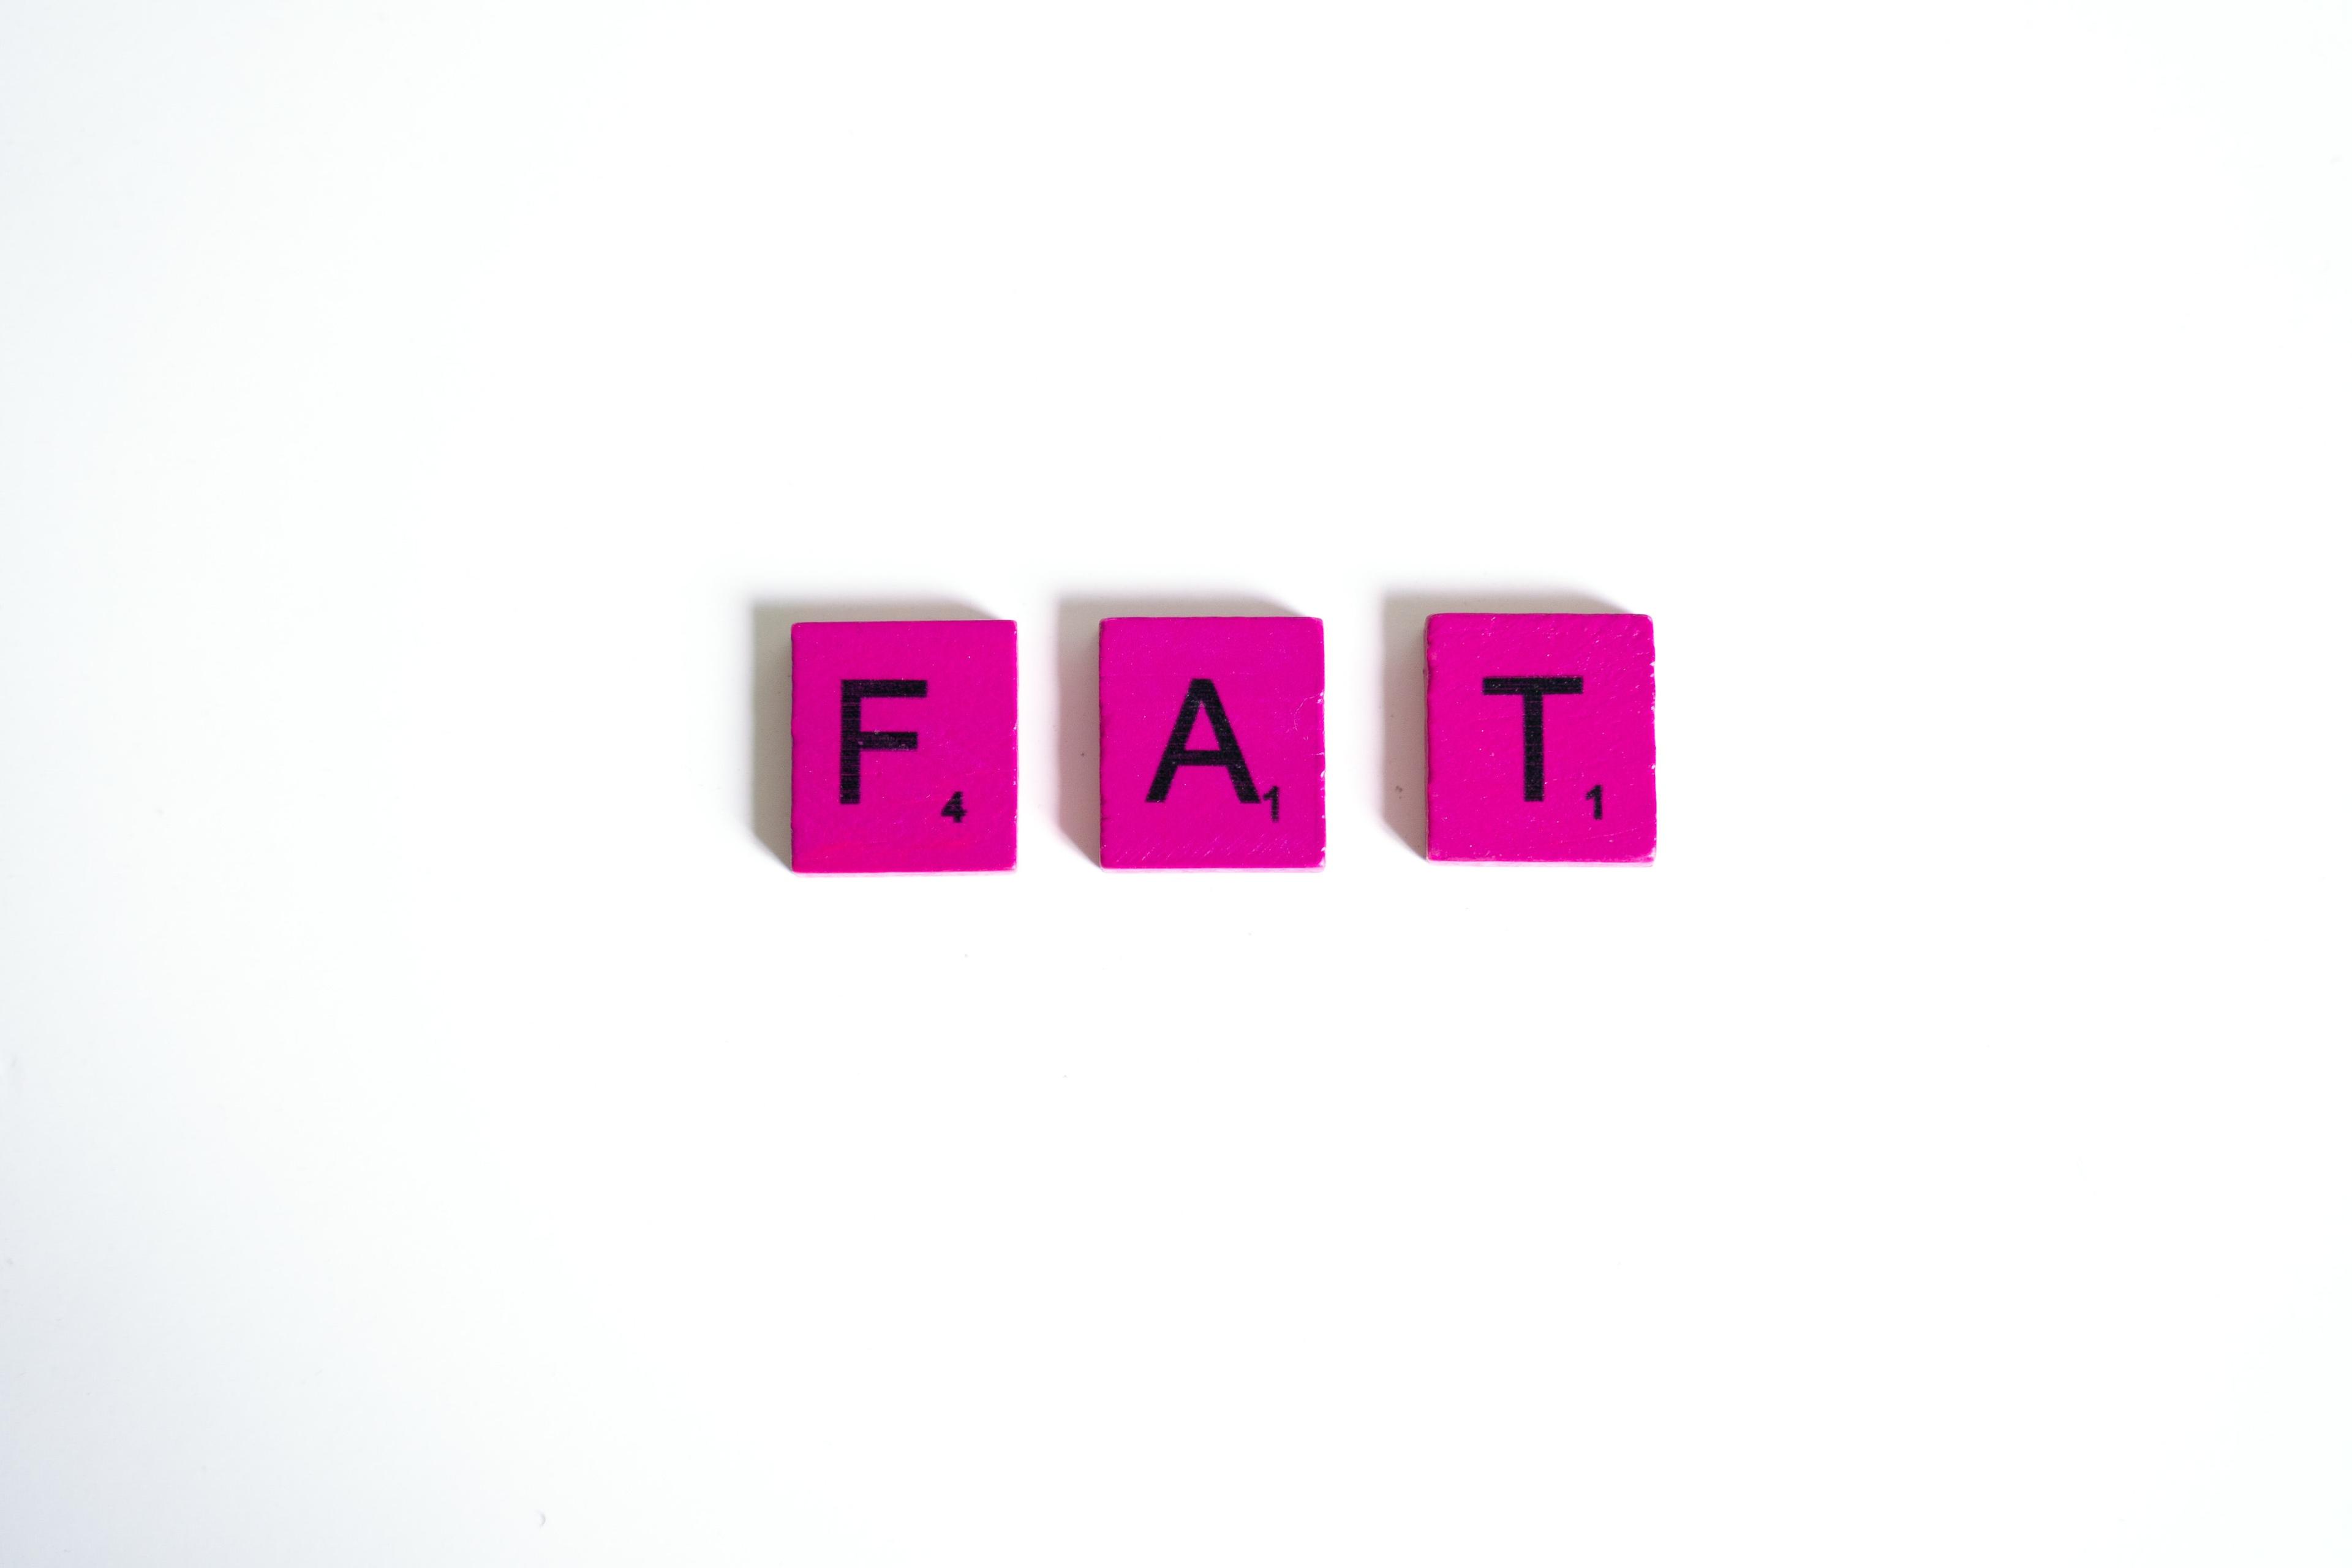 Pink Scrabble tiles spelling out the word "FAT" on a white background